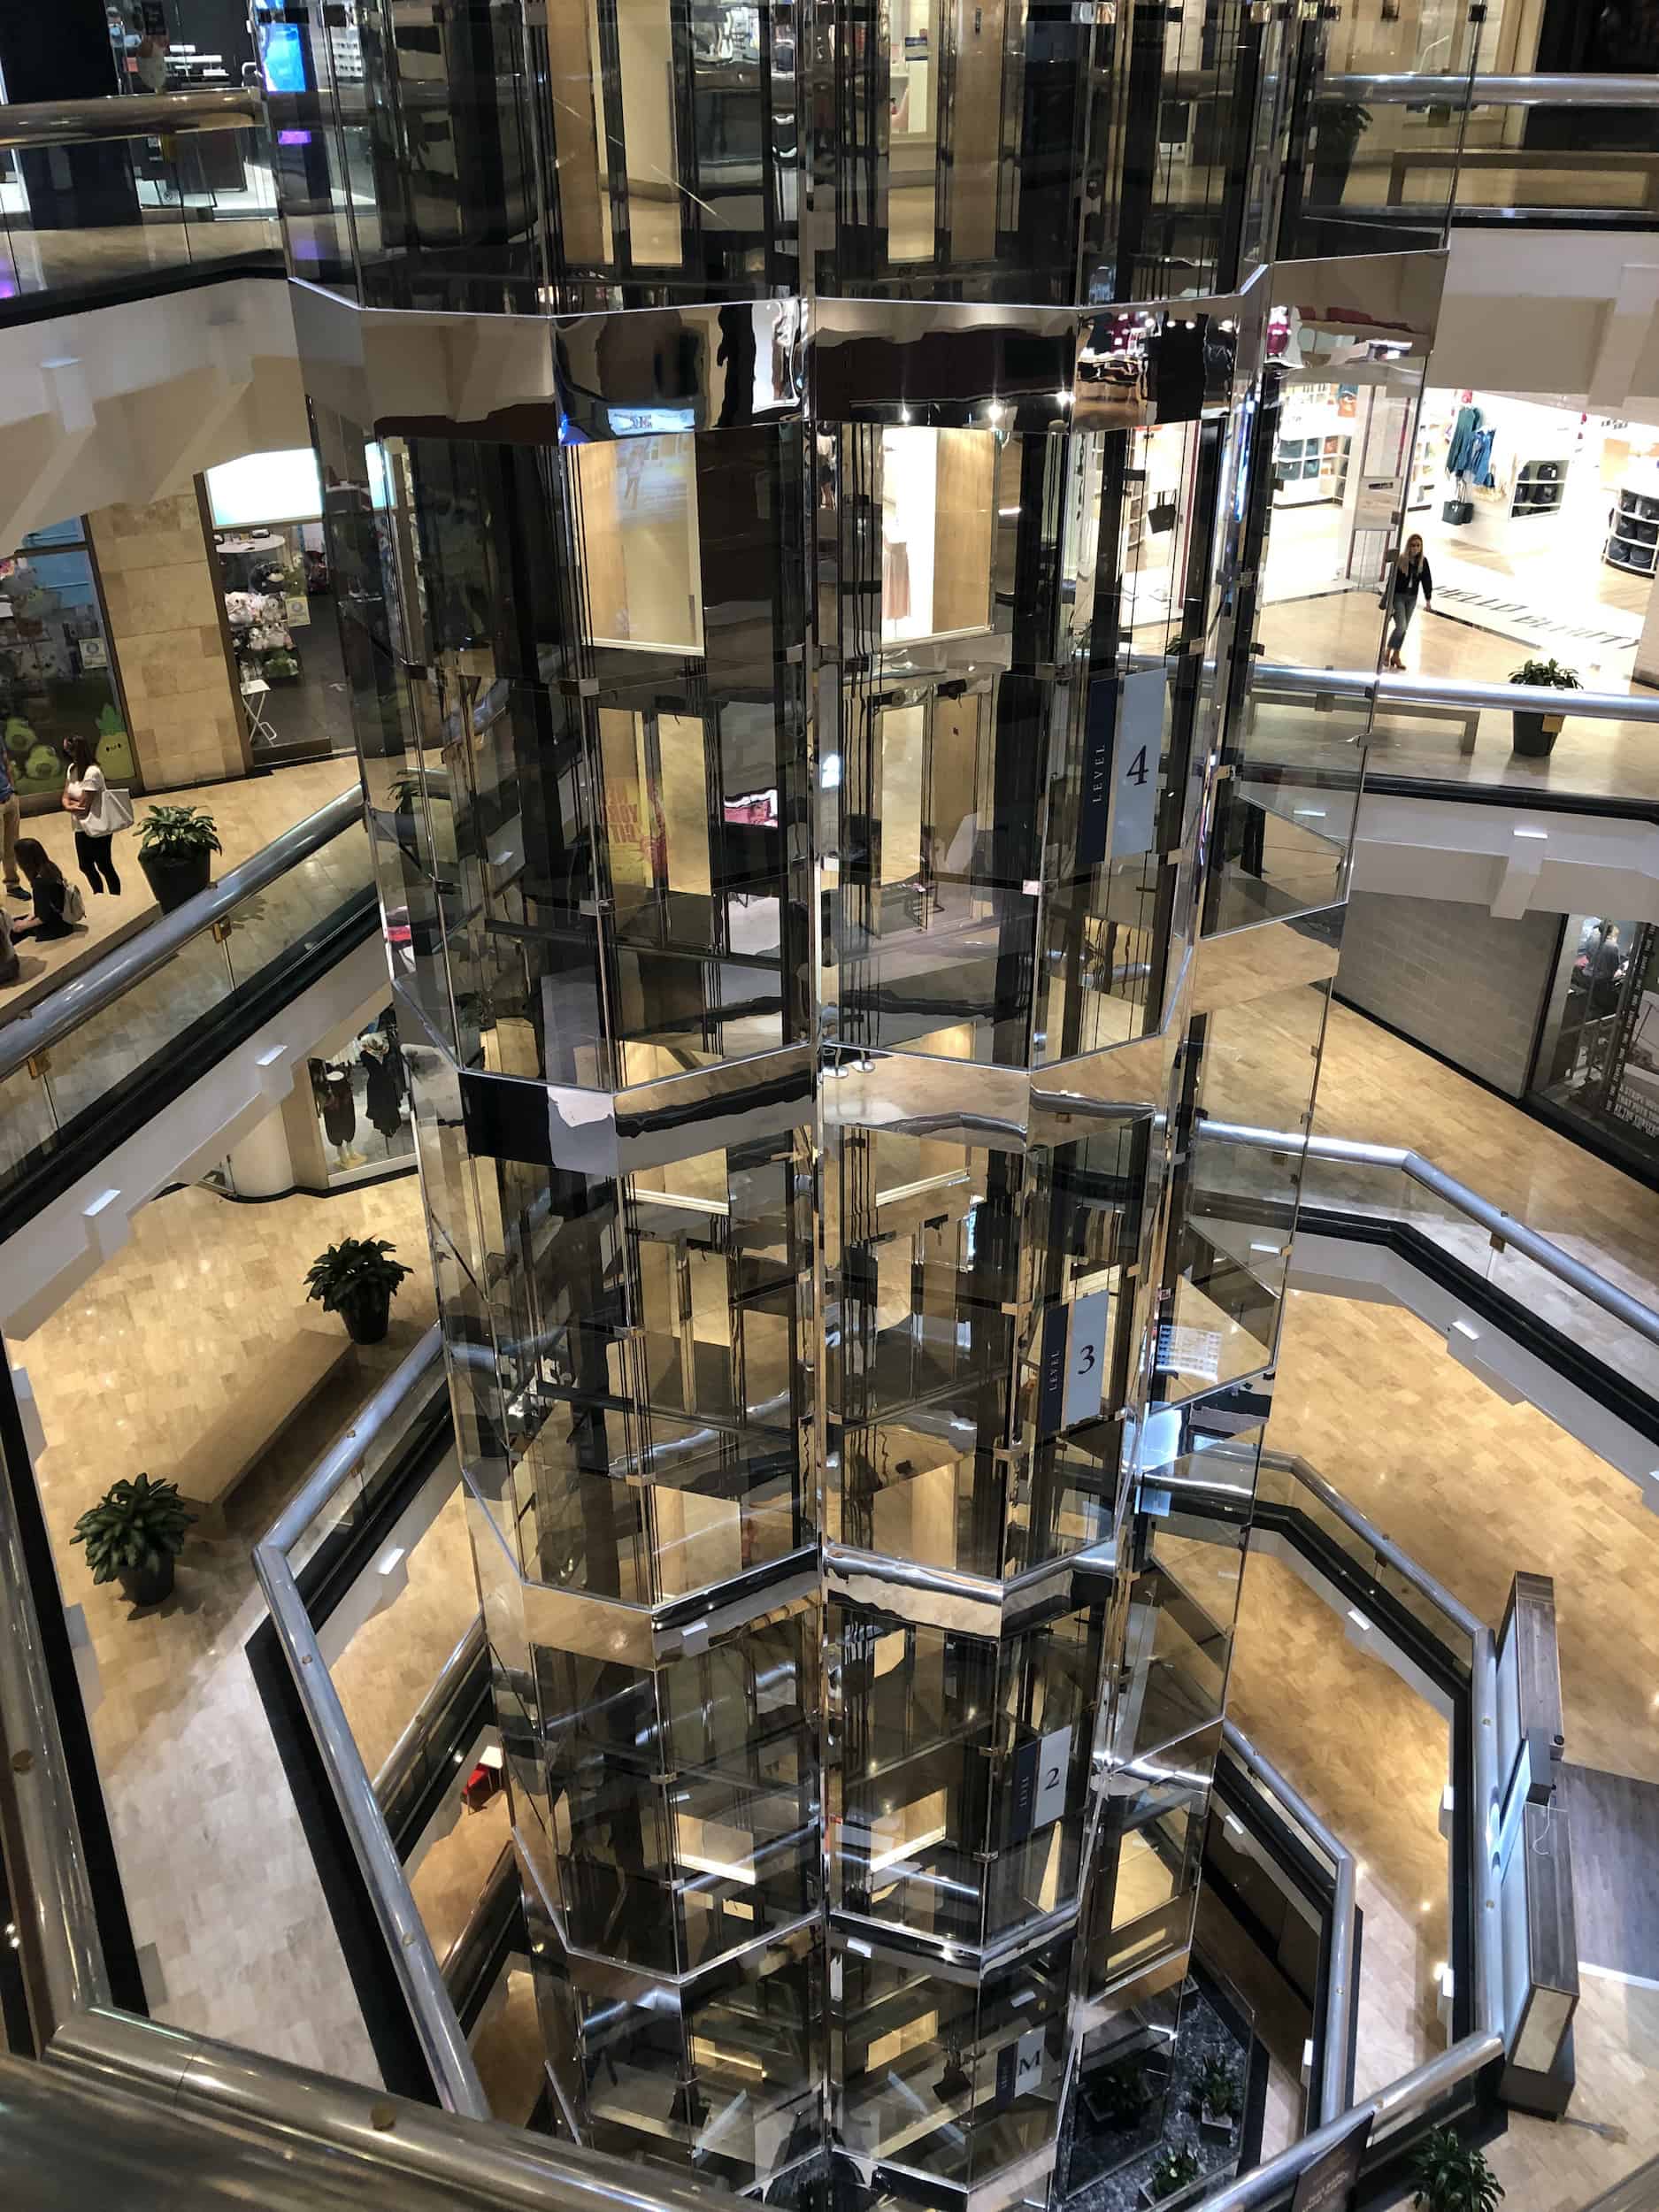 Elevator at Water Tower Place along the Magnificent Mile in Chicago, Illinois